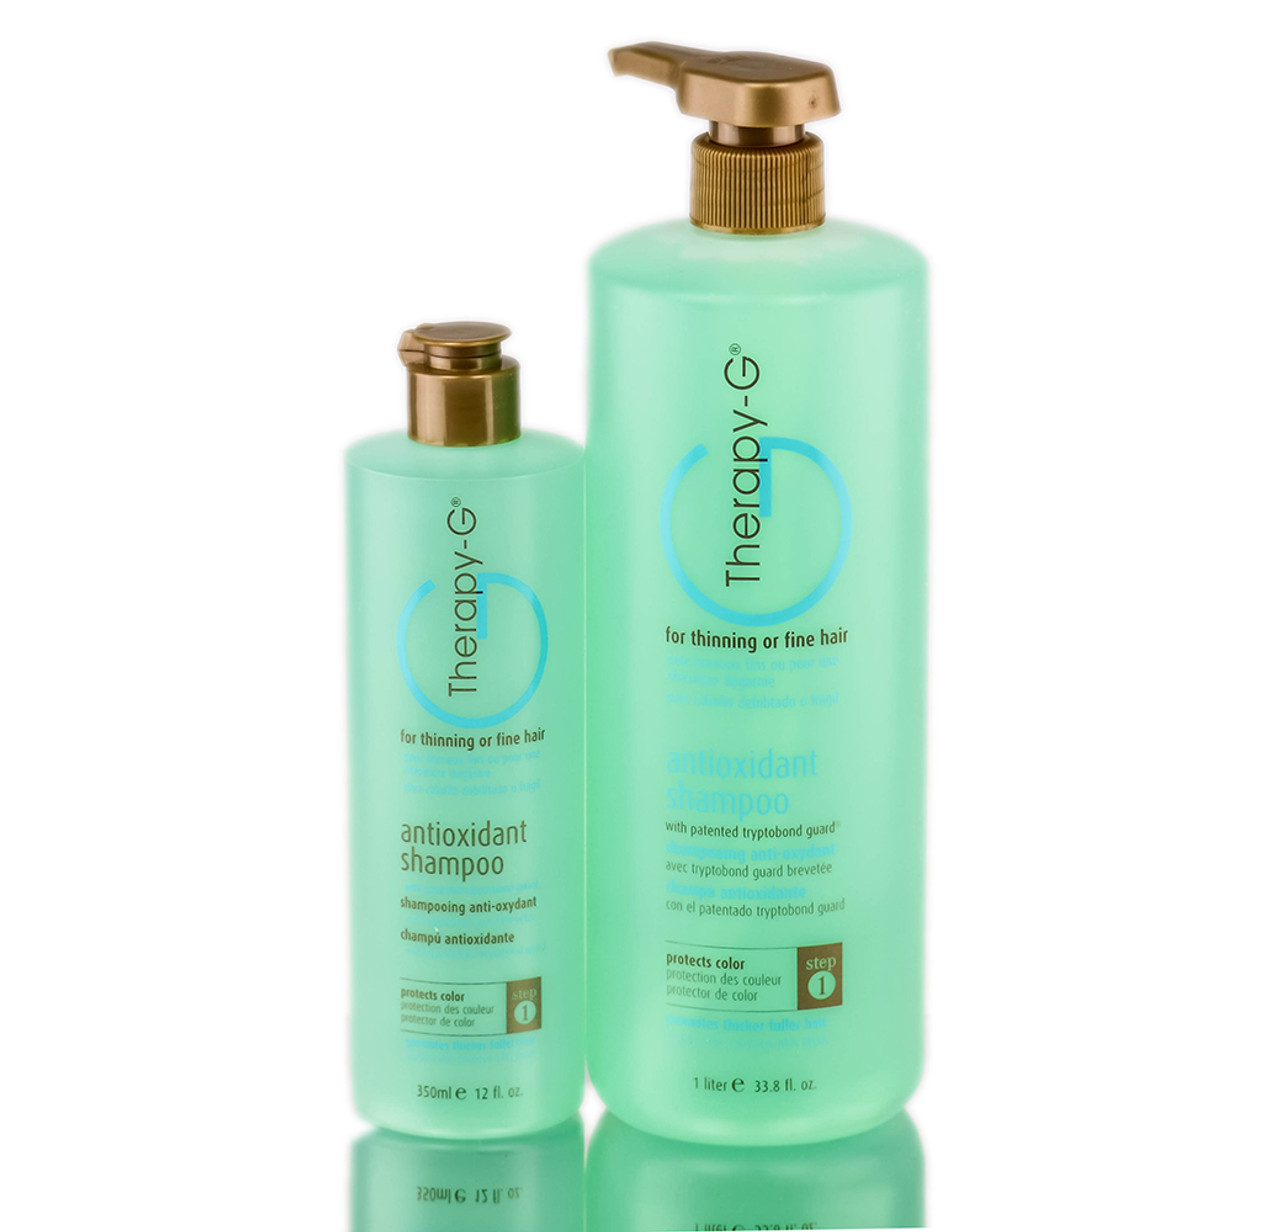 Therapy-G Antioxidant Shampoo for thinning or fine hair ...